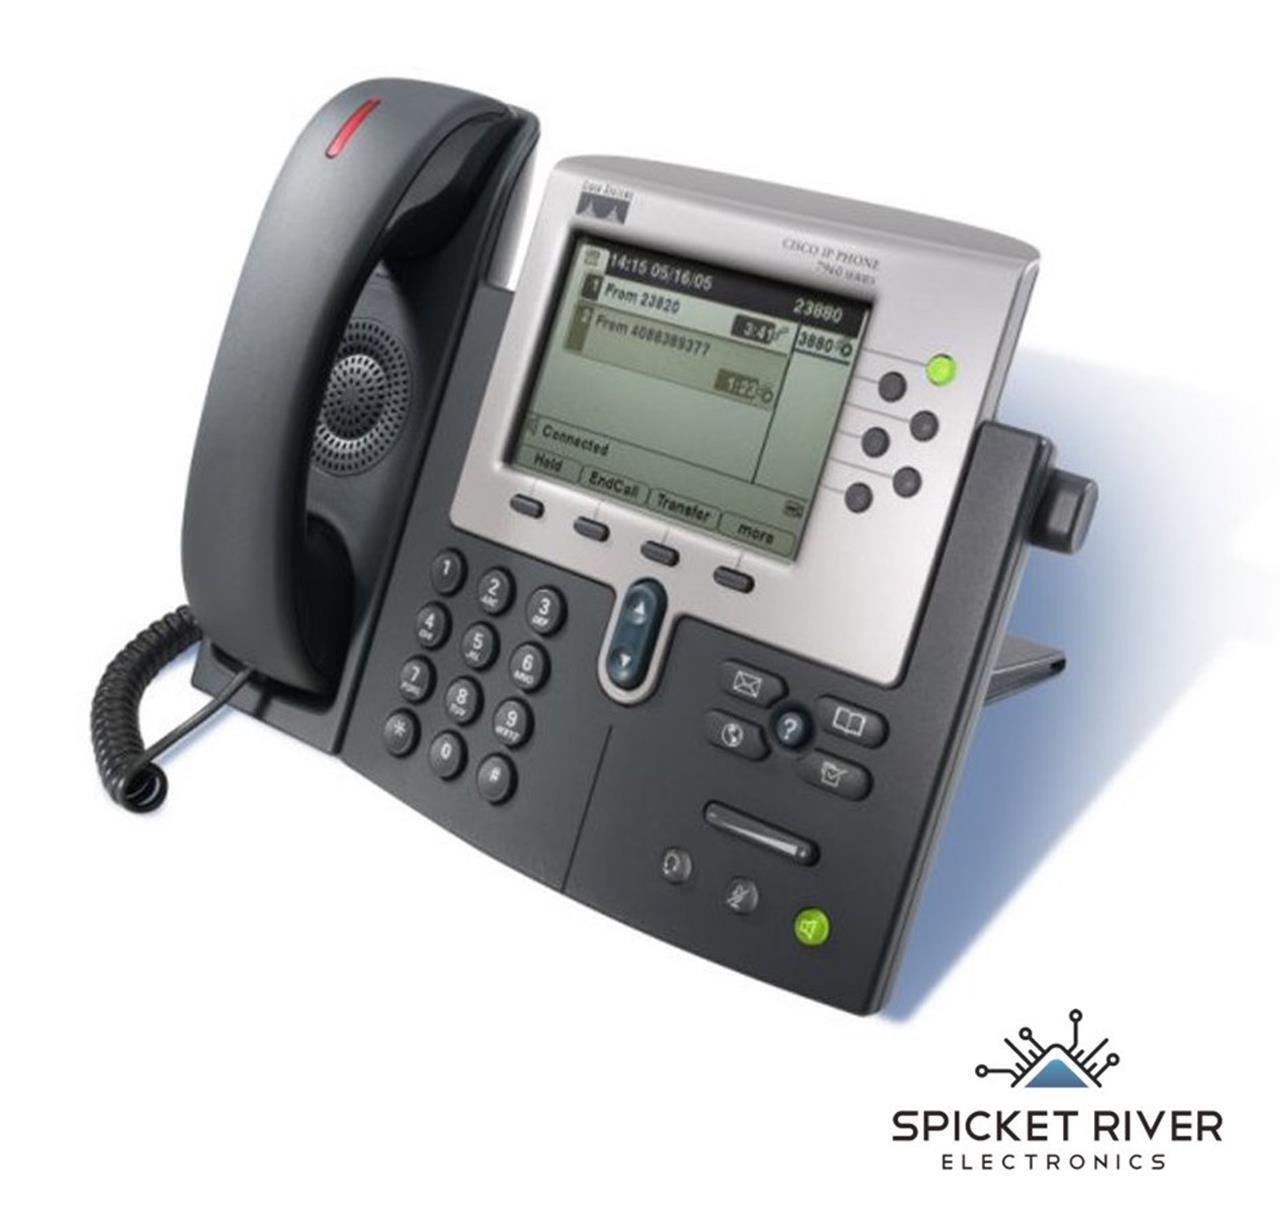 NEW - Cisco CP-7960G IP Business VoIP Office Desk Phone 7900 Series